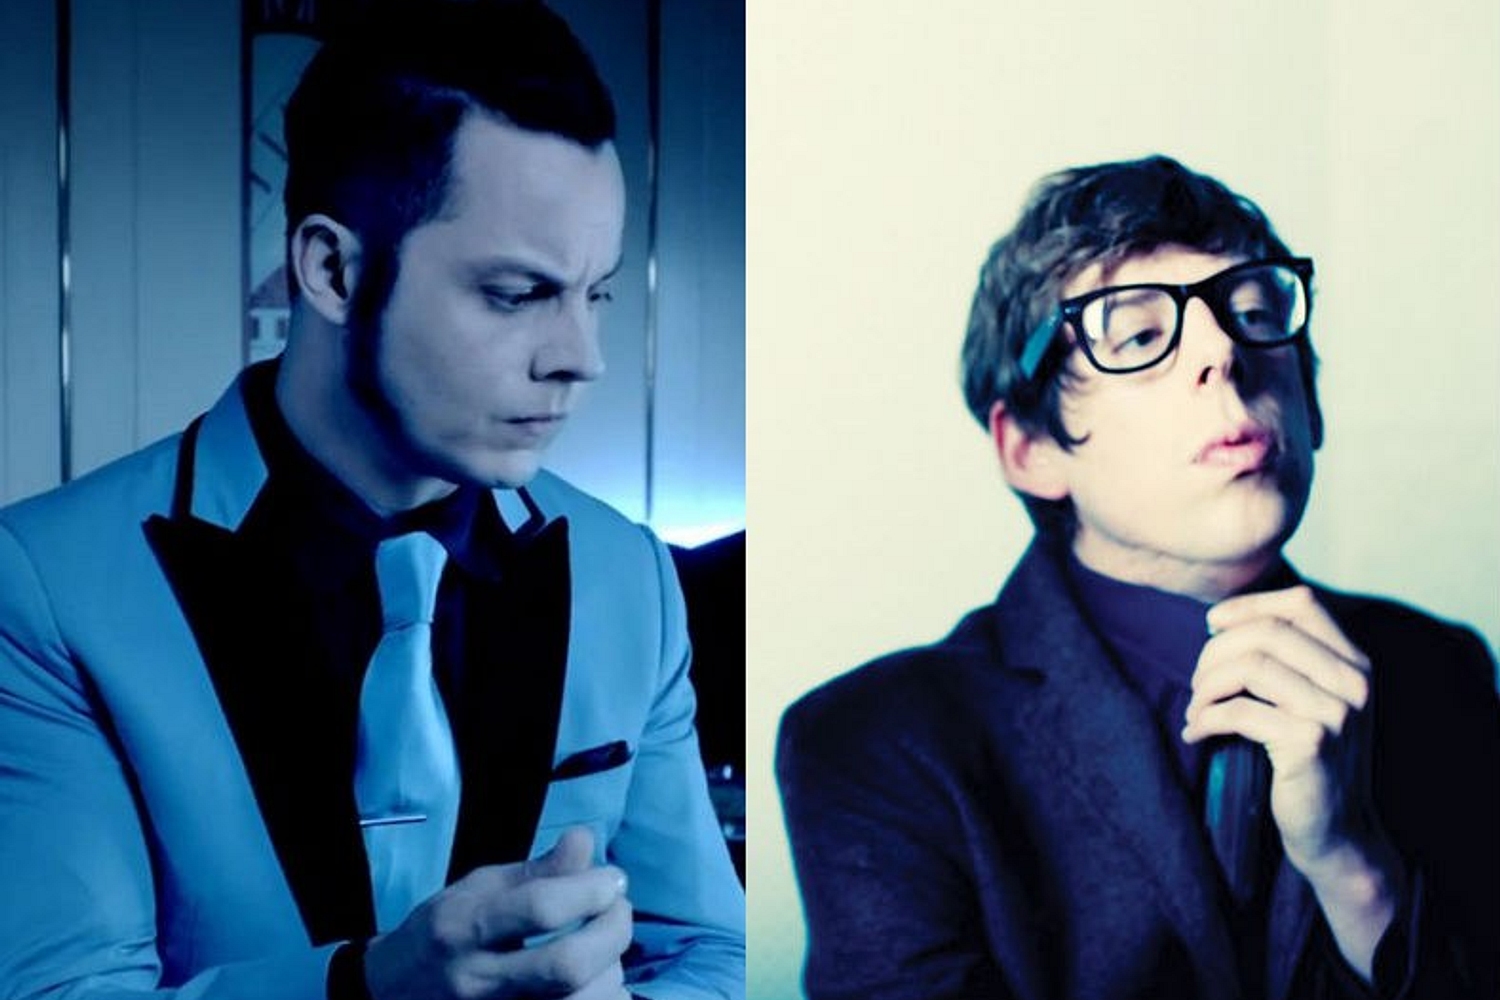 The Black Keys’ Patrick Carney says Jack White tried to fight him in a bar